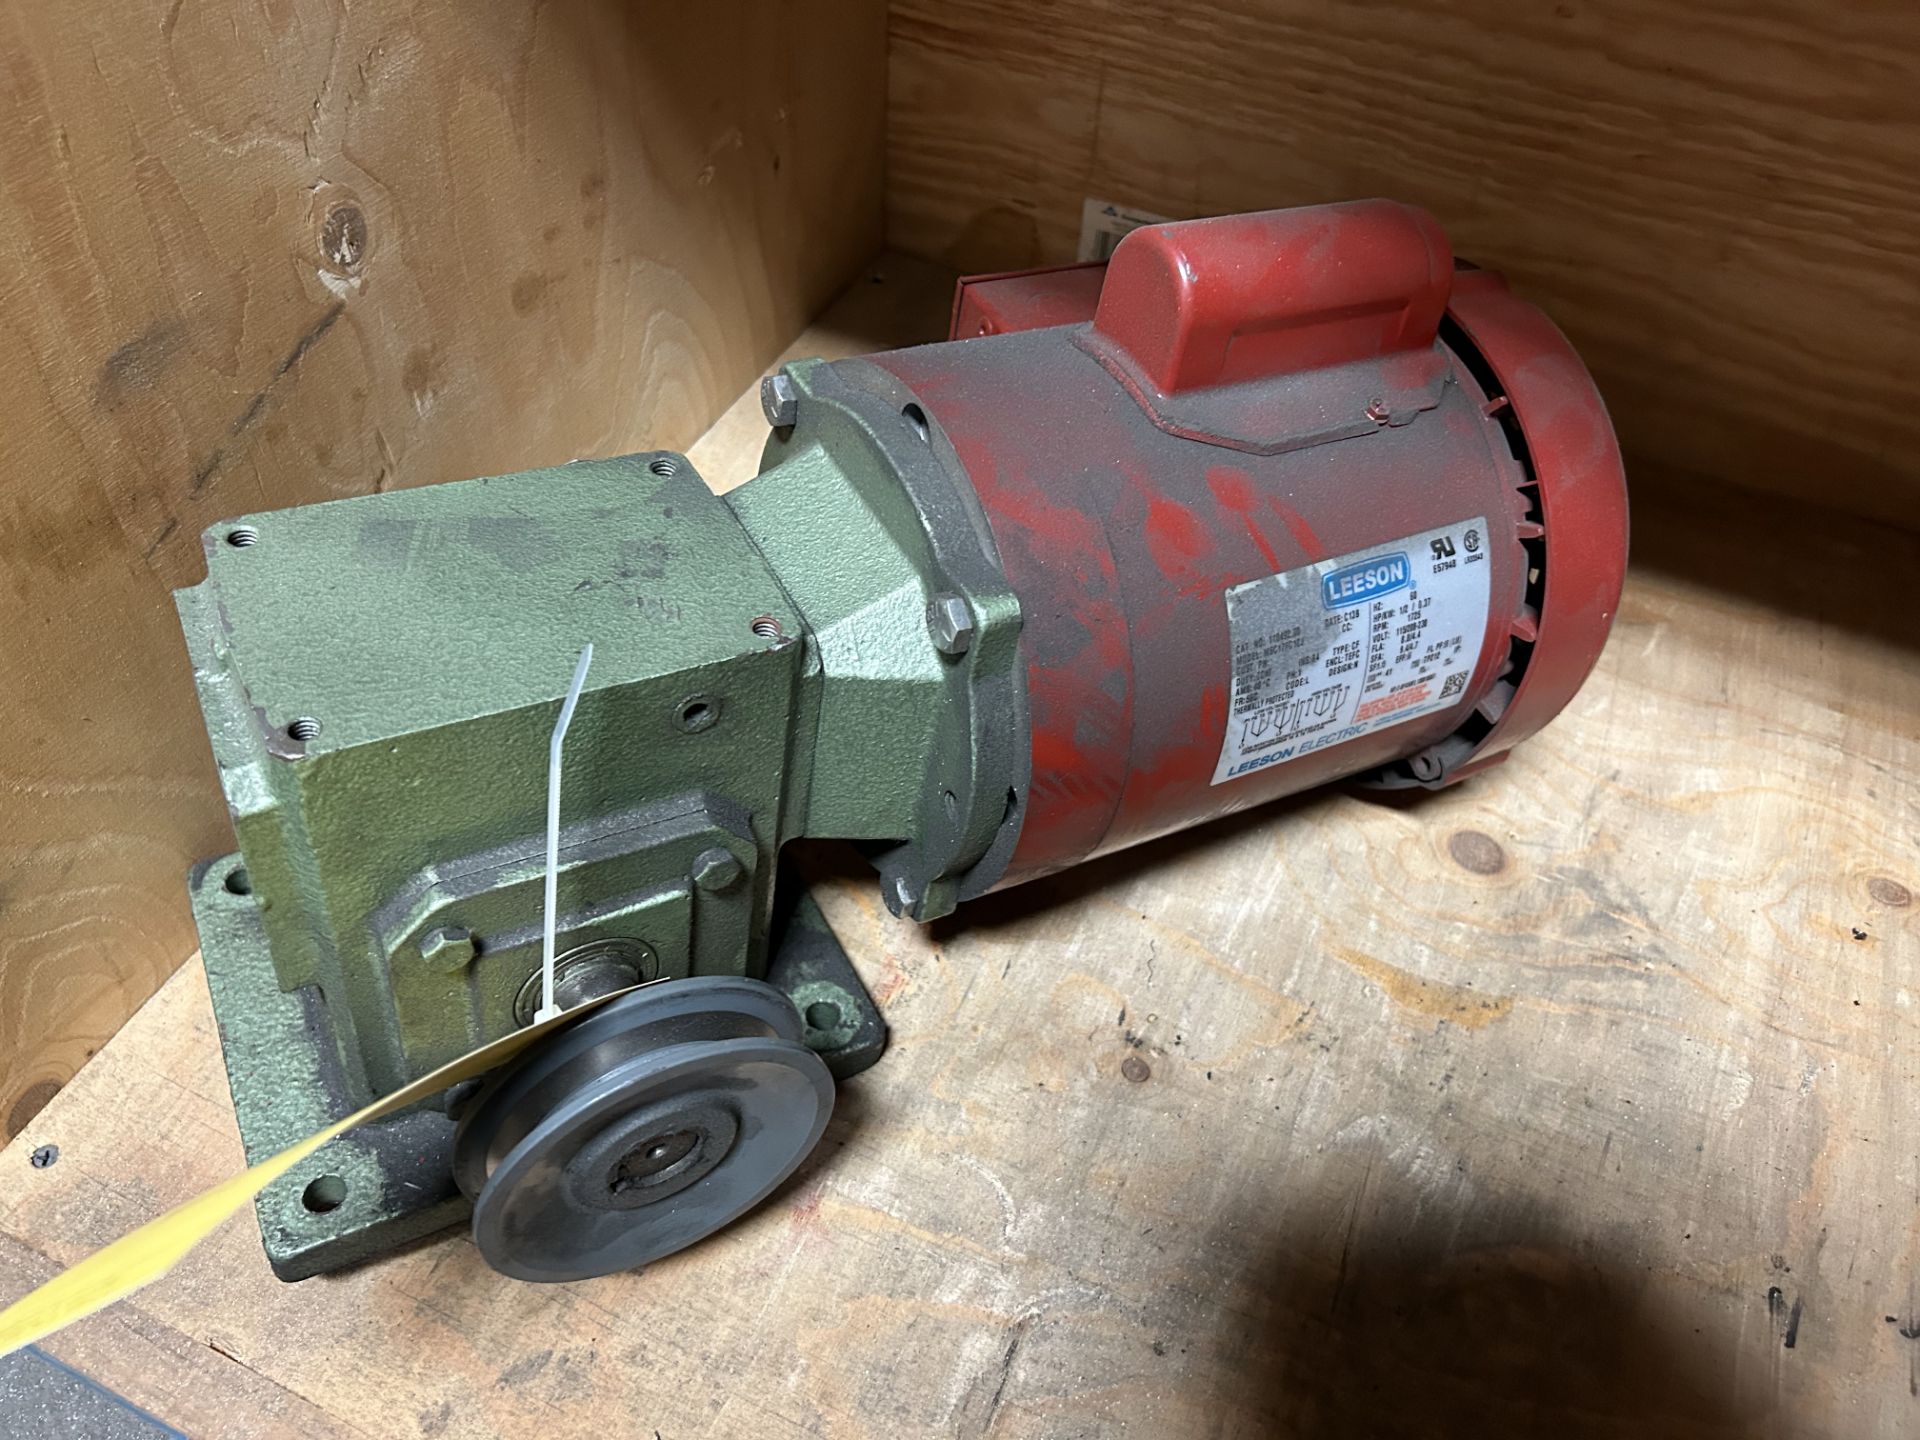 Leeson 1/2 HP Motor with Gear Reducer, Rigging/Loading Fee: $10 - Image 2 of 4